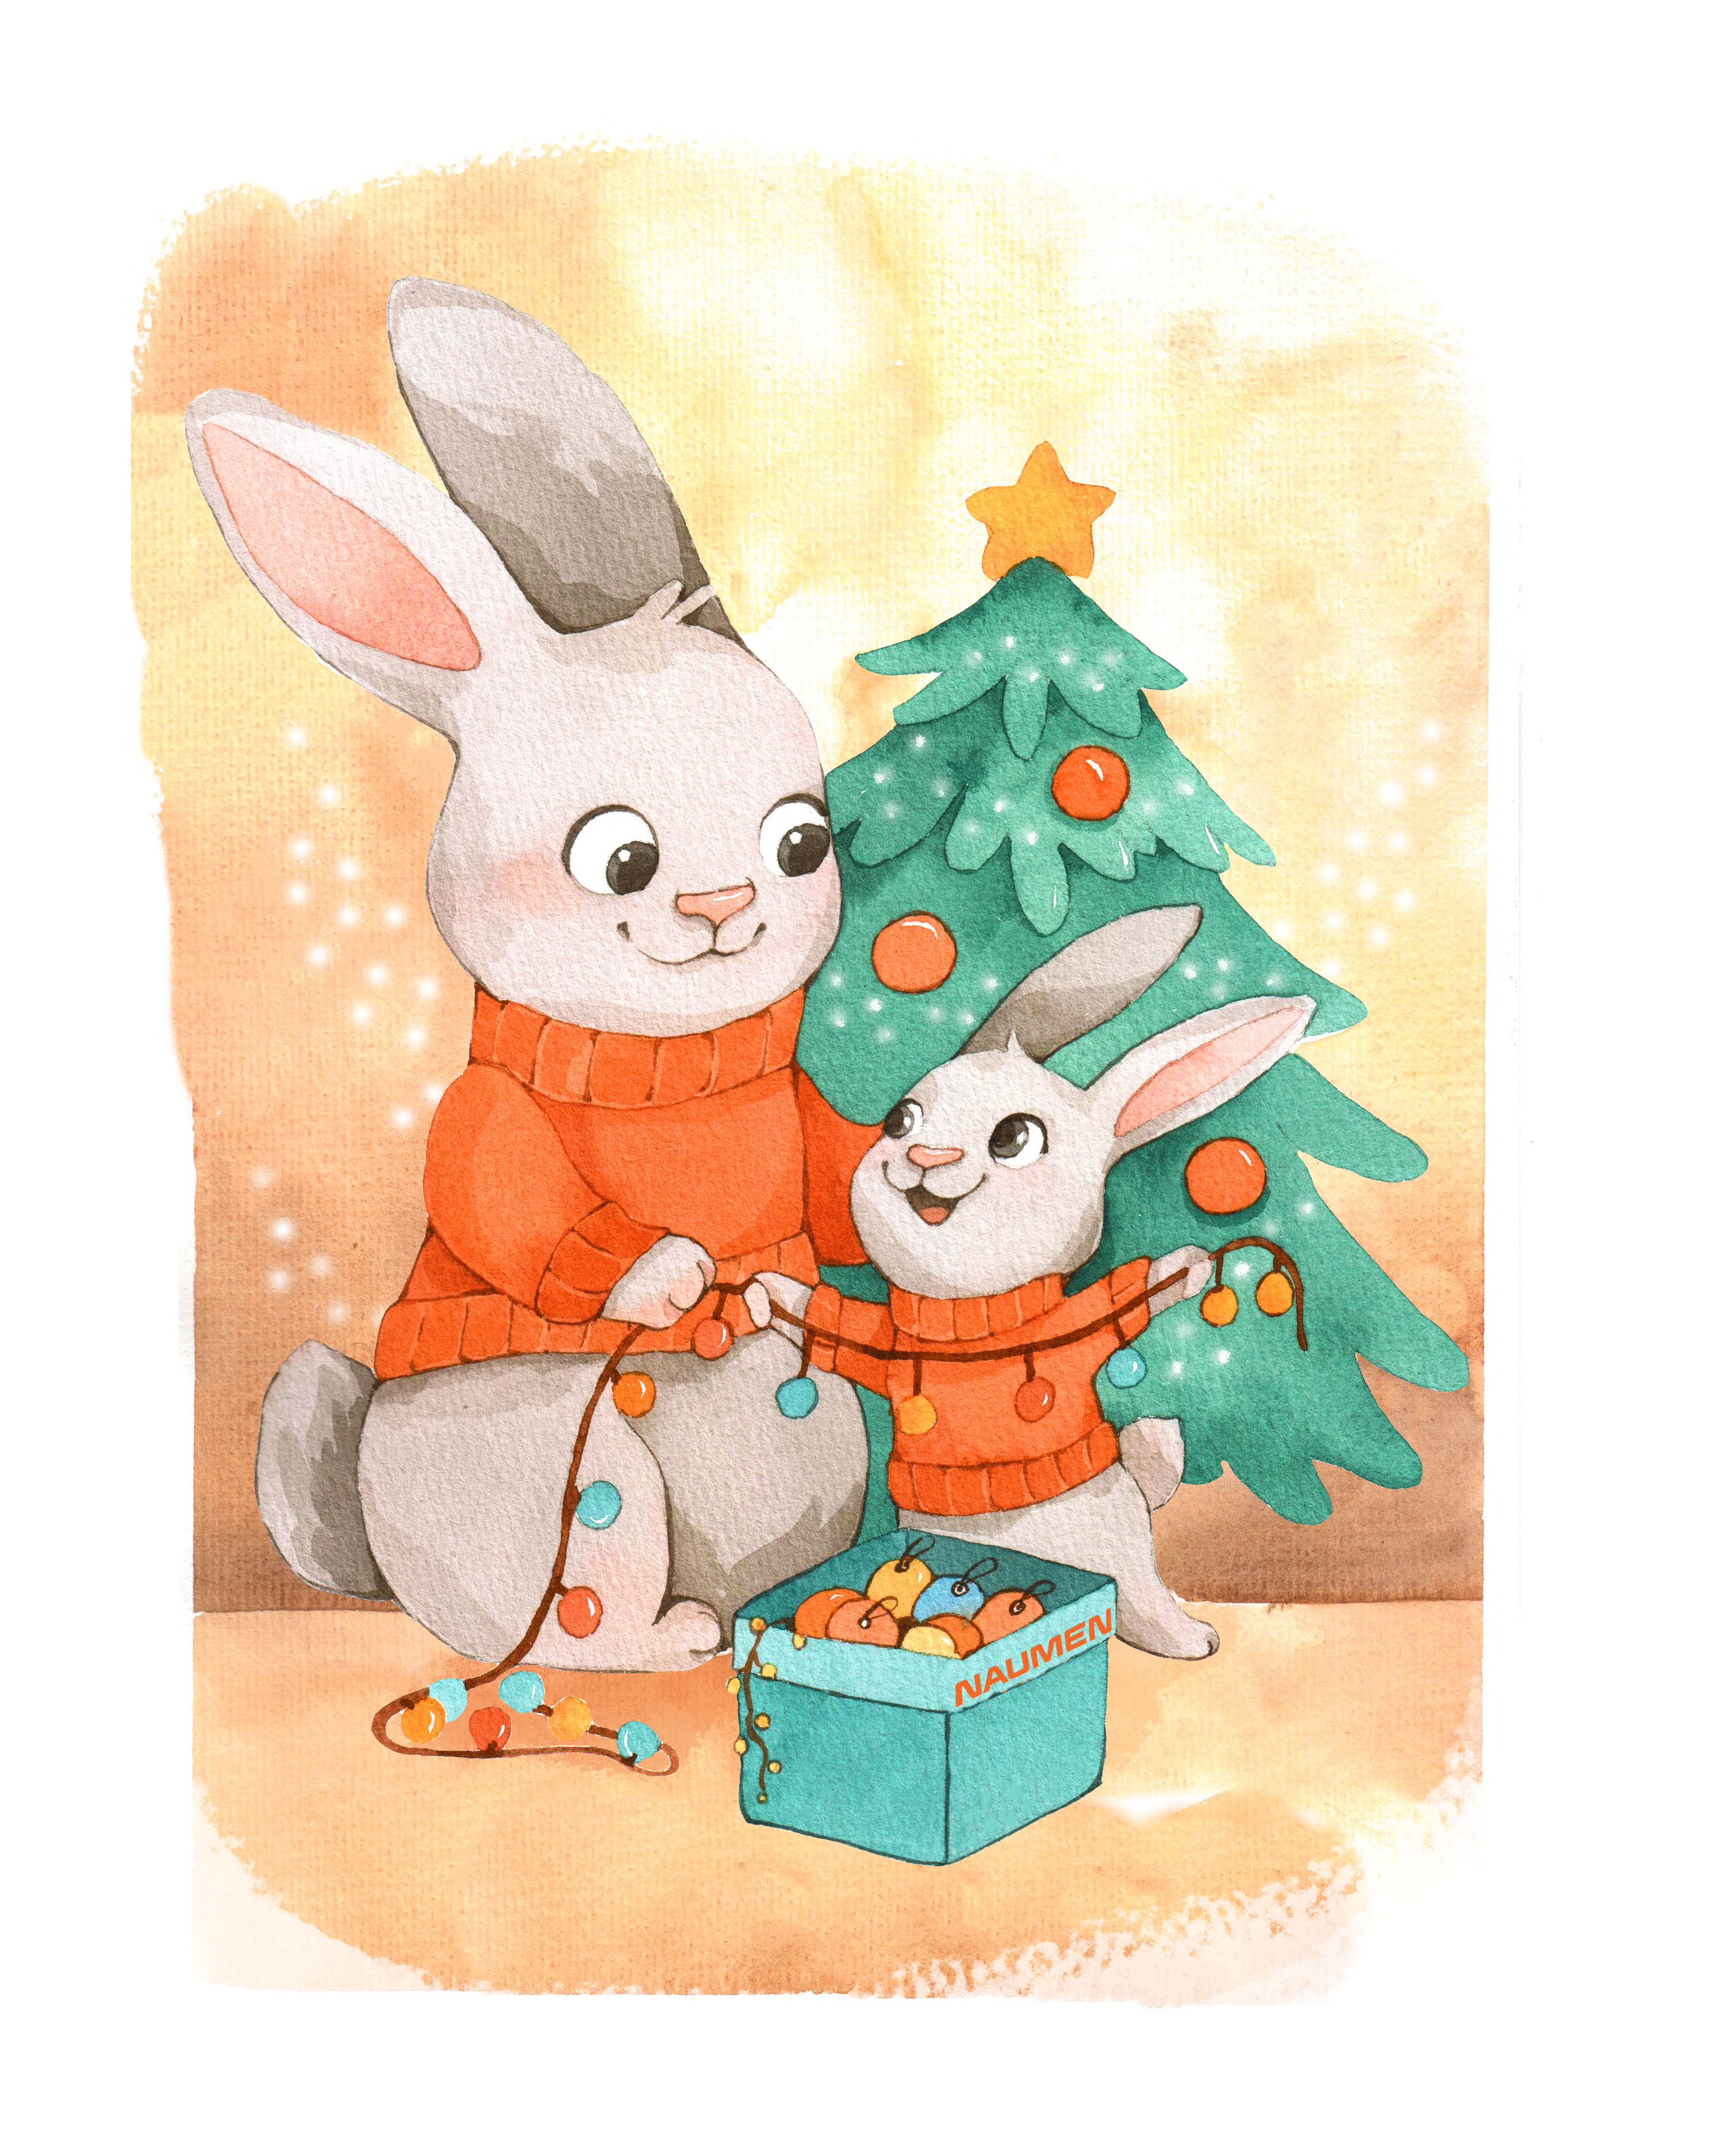 New year's Letter of Rabbits illustrations